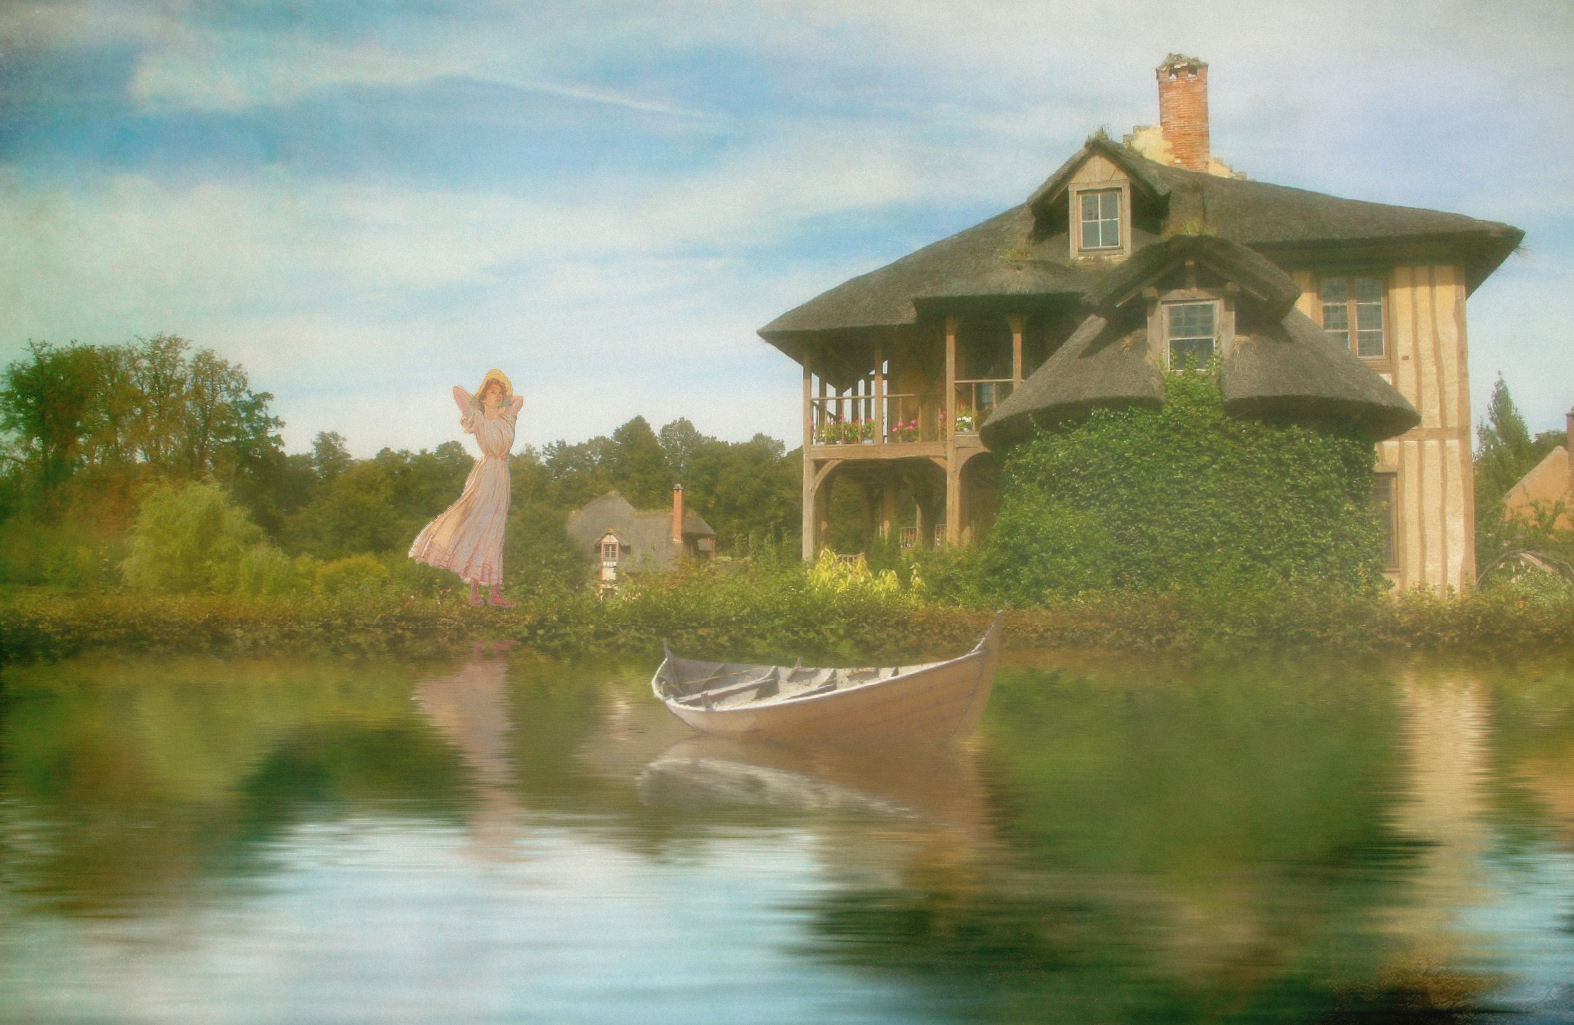 a painting of a house and a boat are pictured